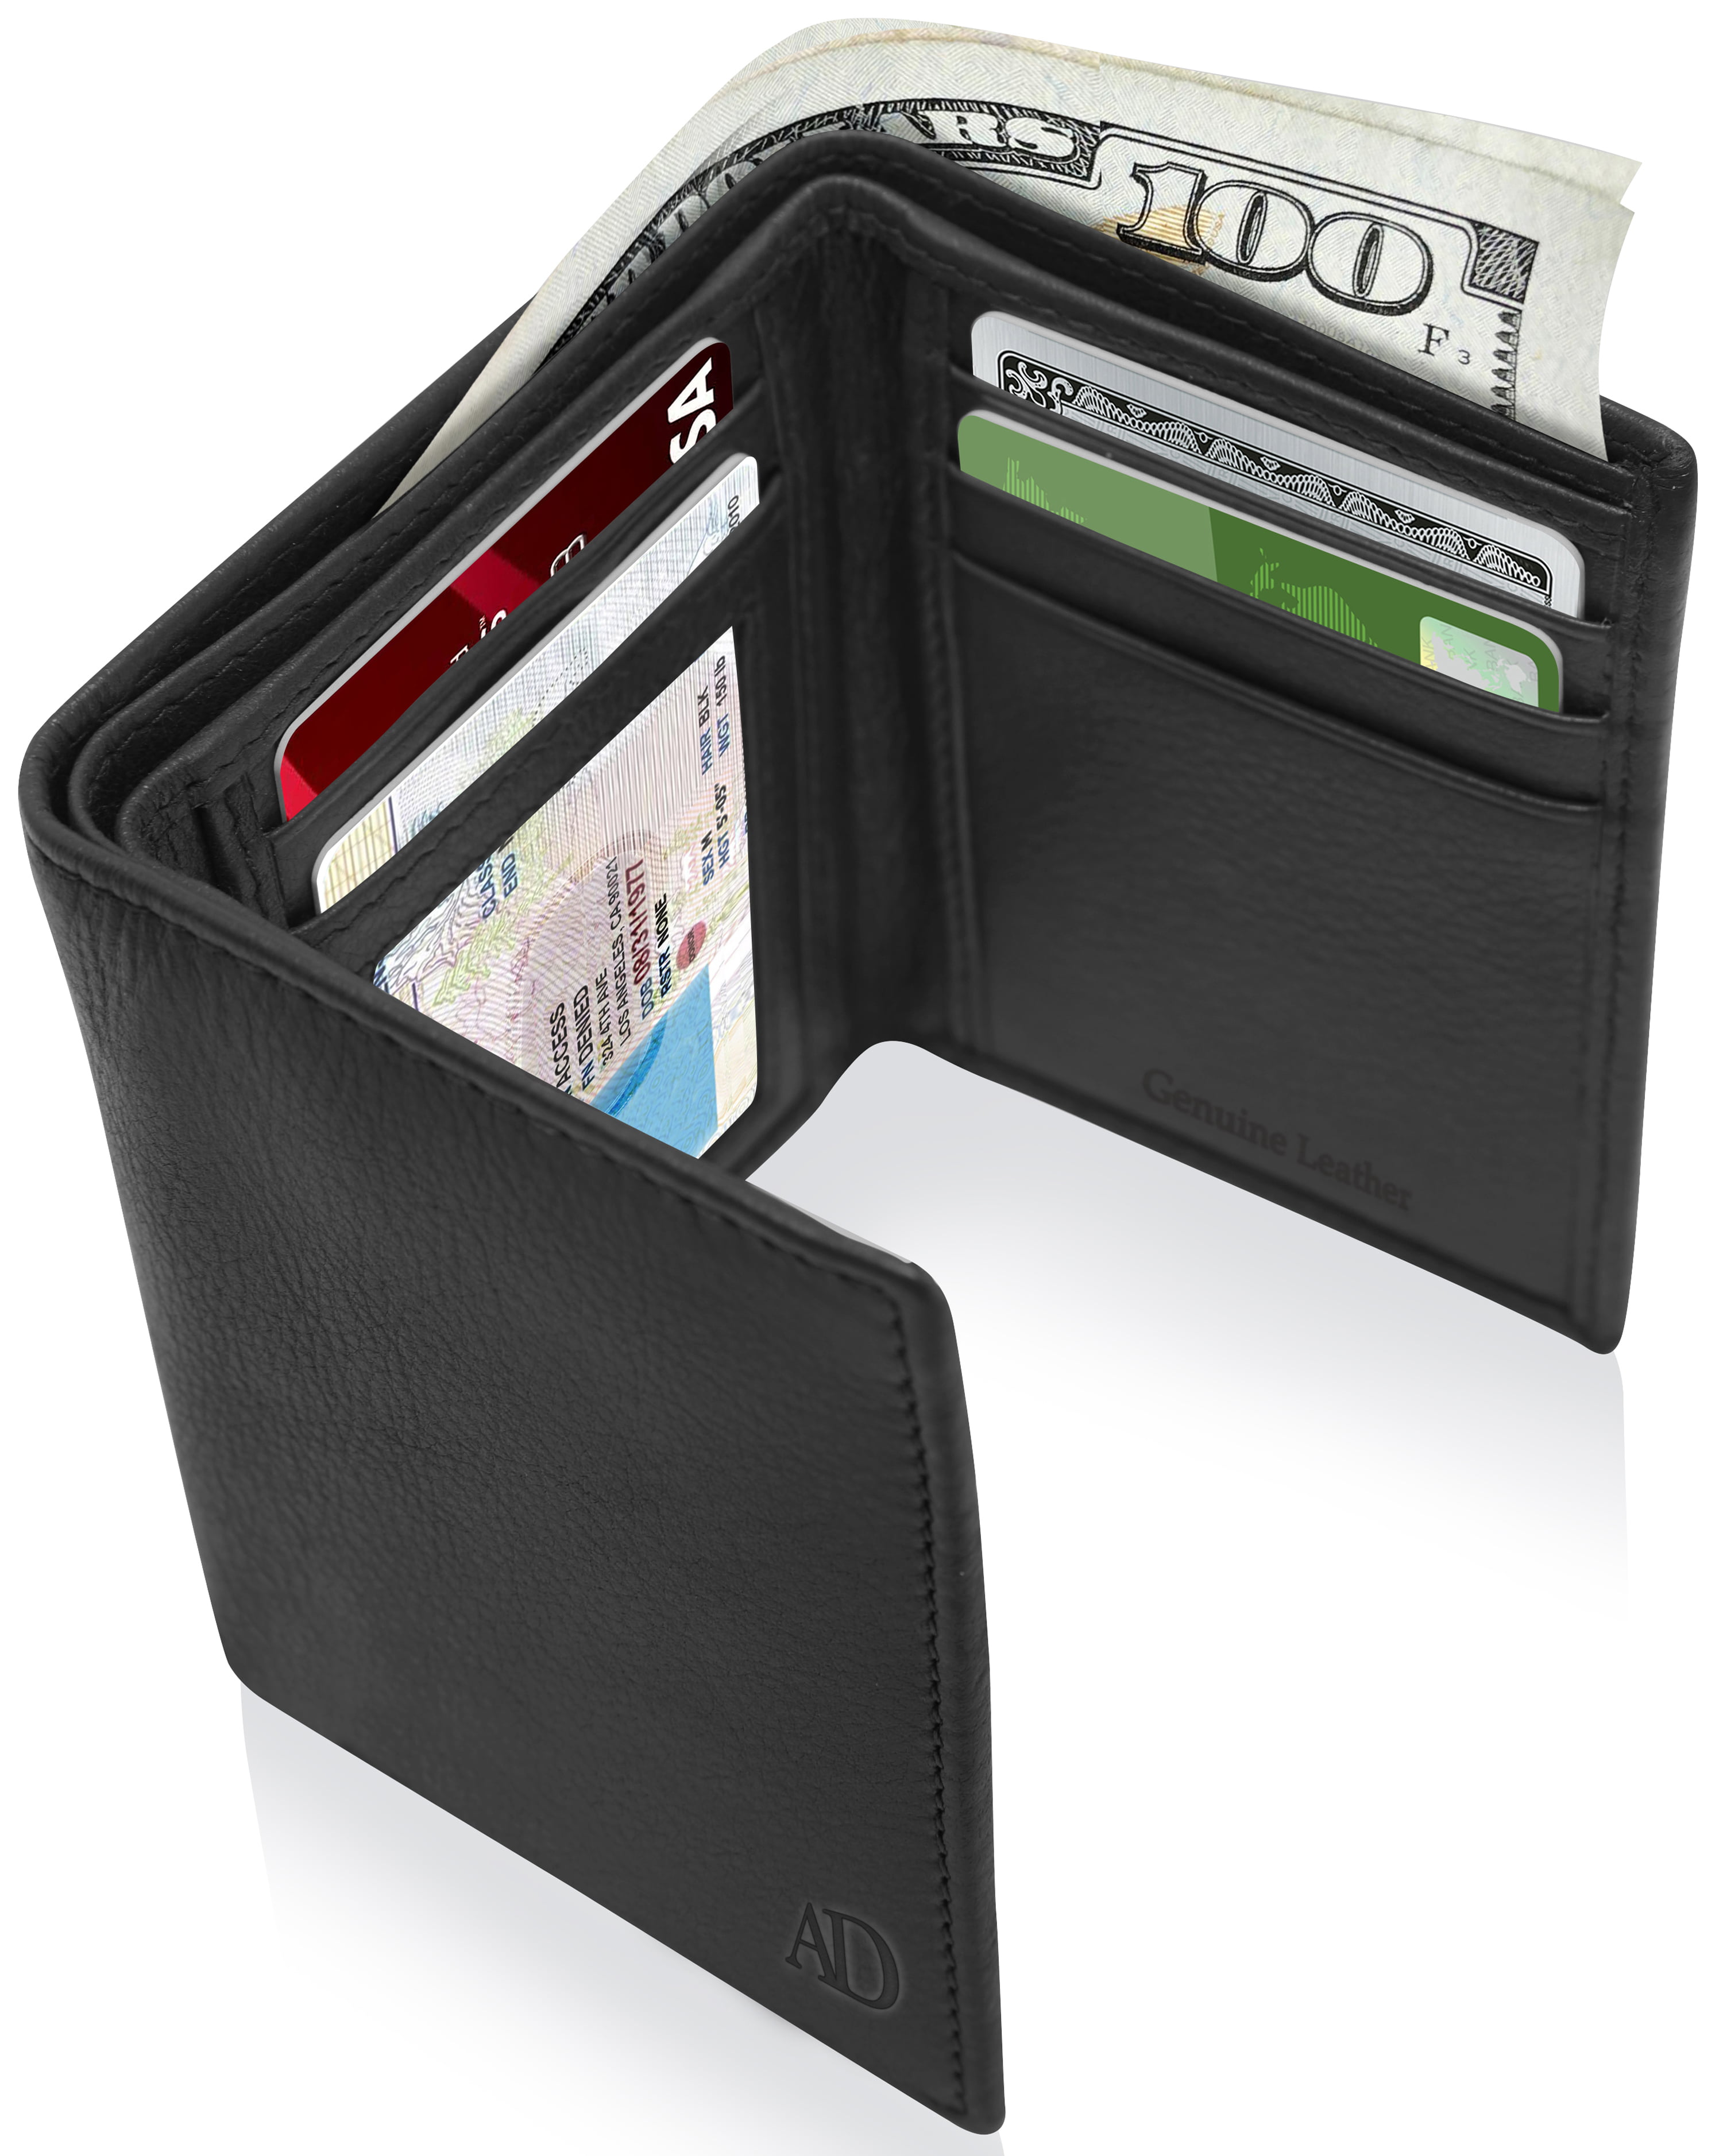 Genuine Leather Wallets For Men - Trifold Mens Wallet With ID Window RFID Blocking - nrd.kbic-nsn.gov